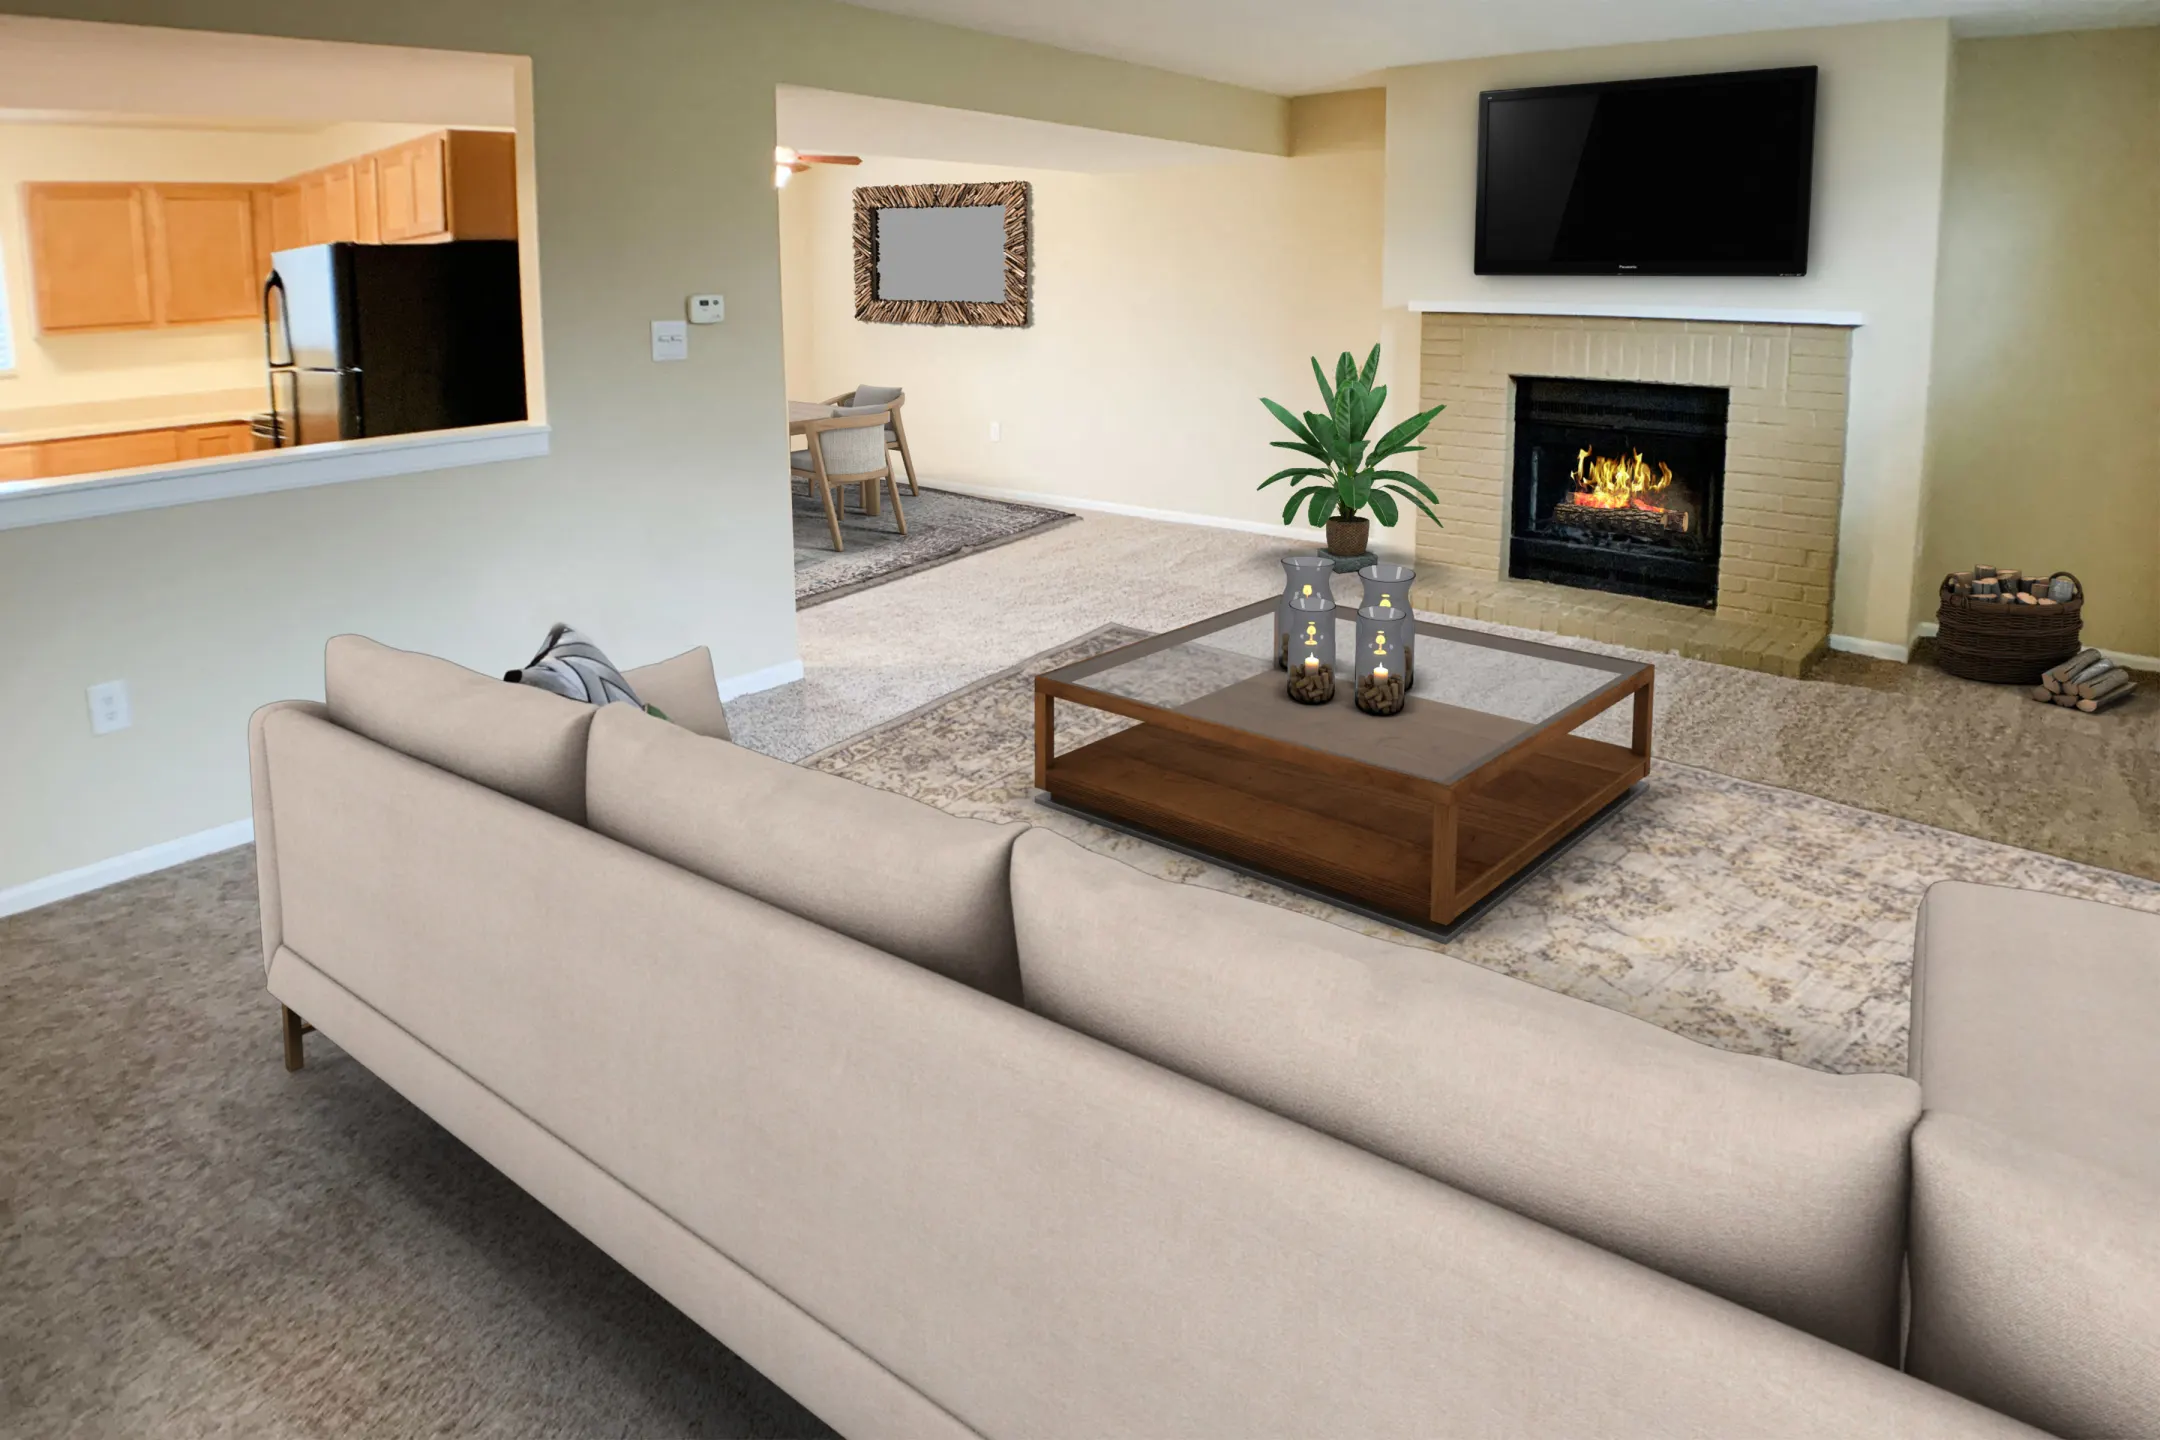 Living Room - The Villas at Kingswood - West Chester, OH